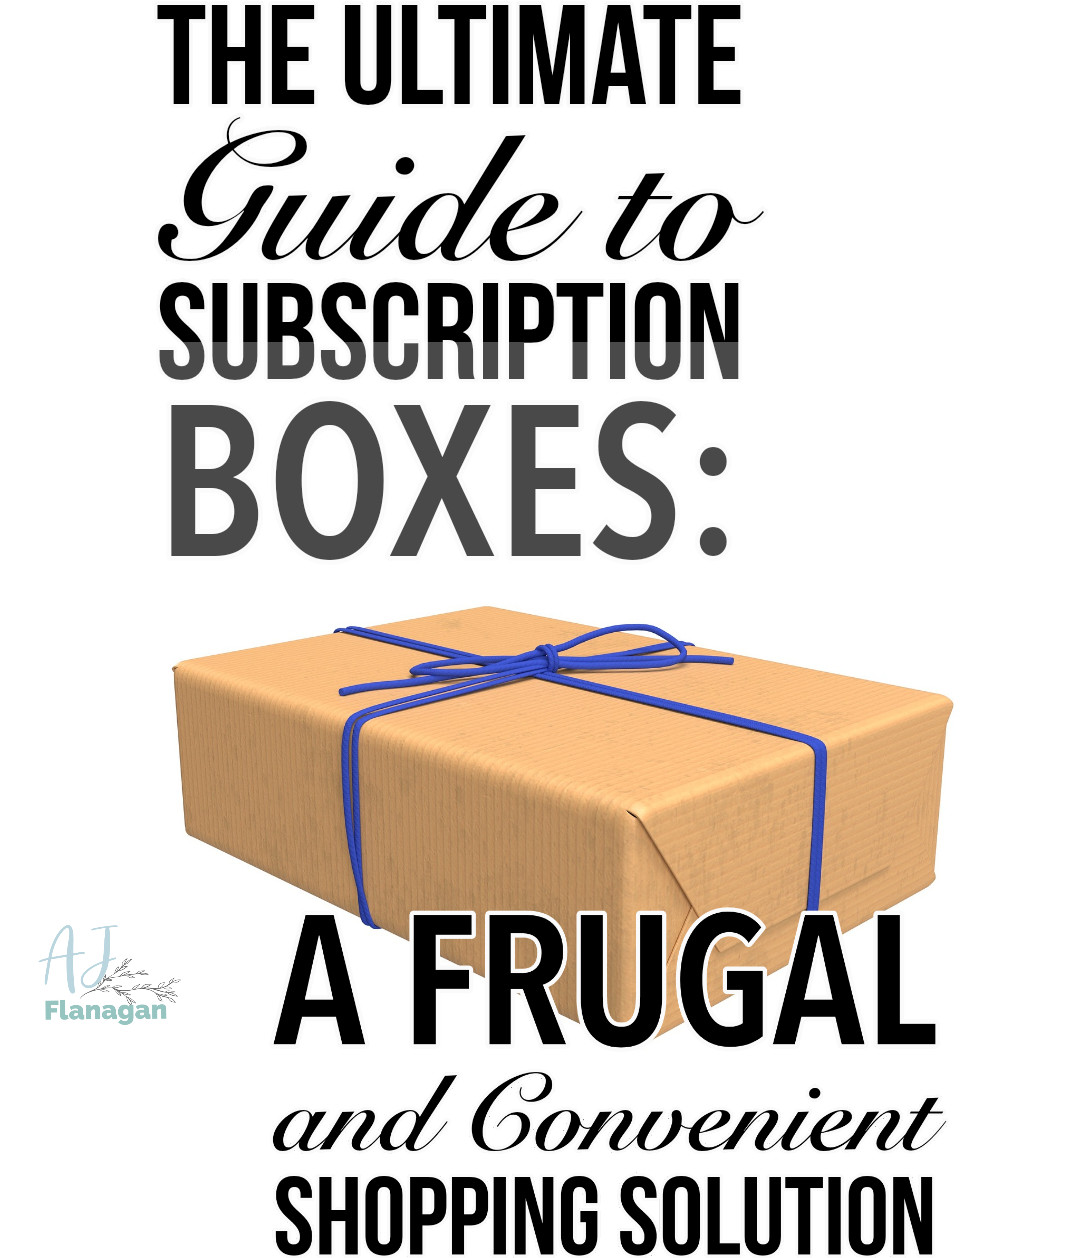 The Ultimate Guide to Subscription Boxes: A Frugal and Convenient Shopping Solution